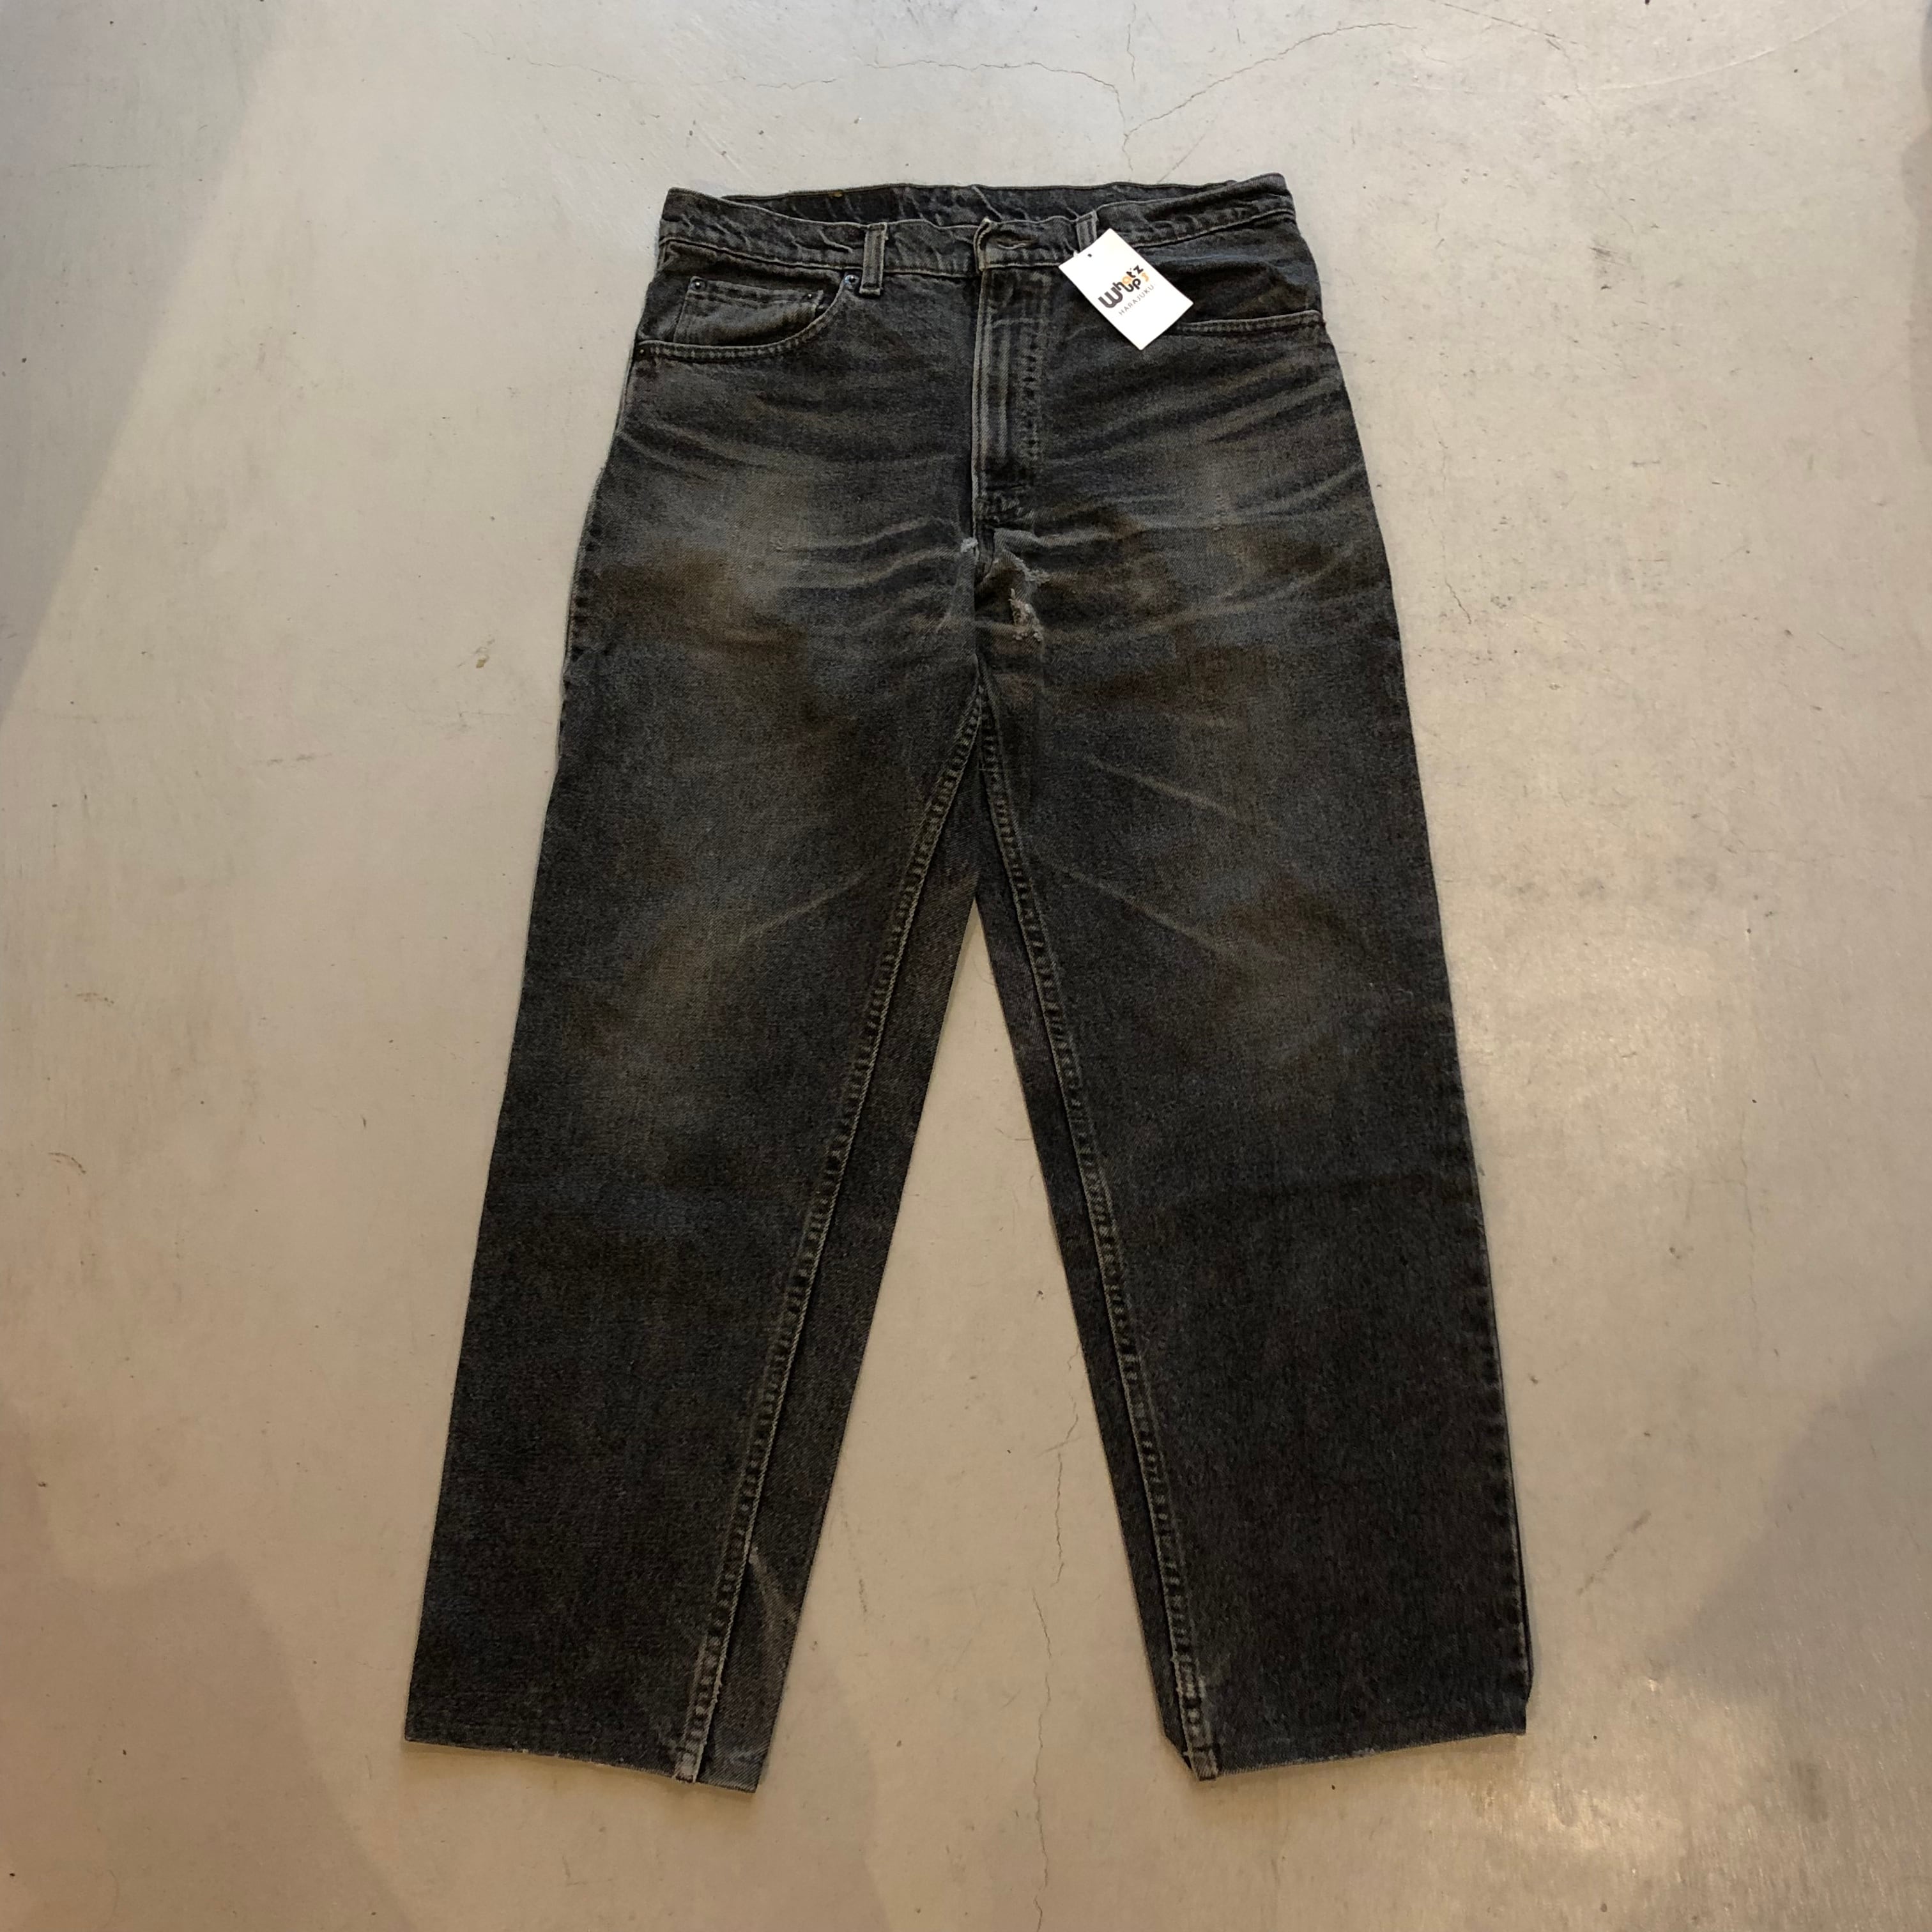 90s Levi's “先染め” 550 black denim pants【高円寺店】 | What’z up powered by BASE